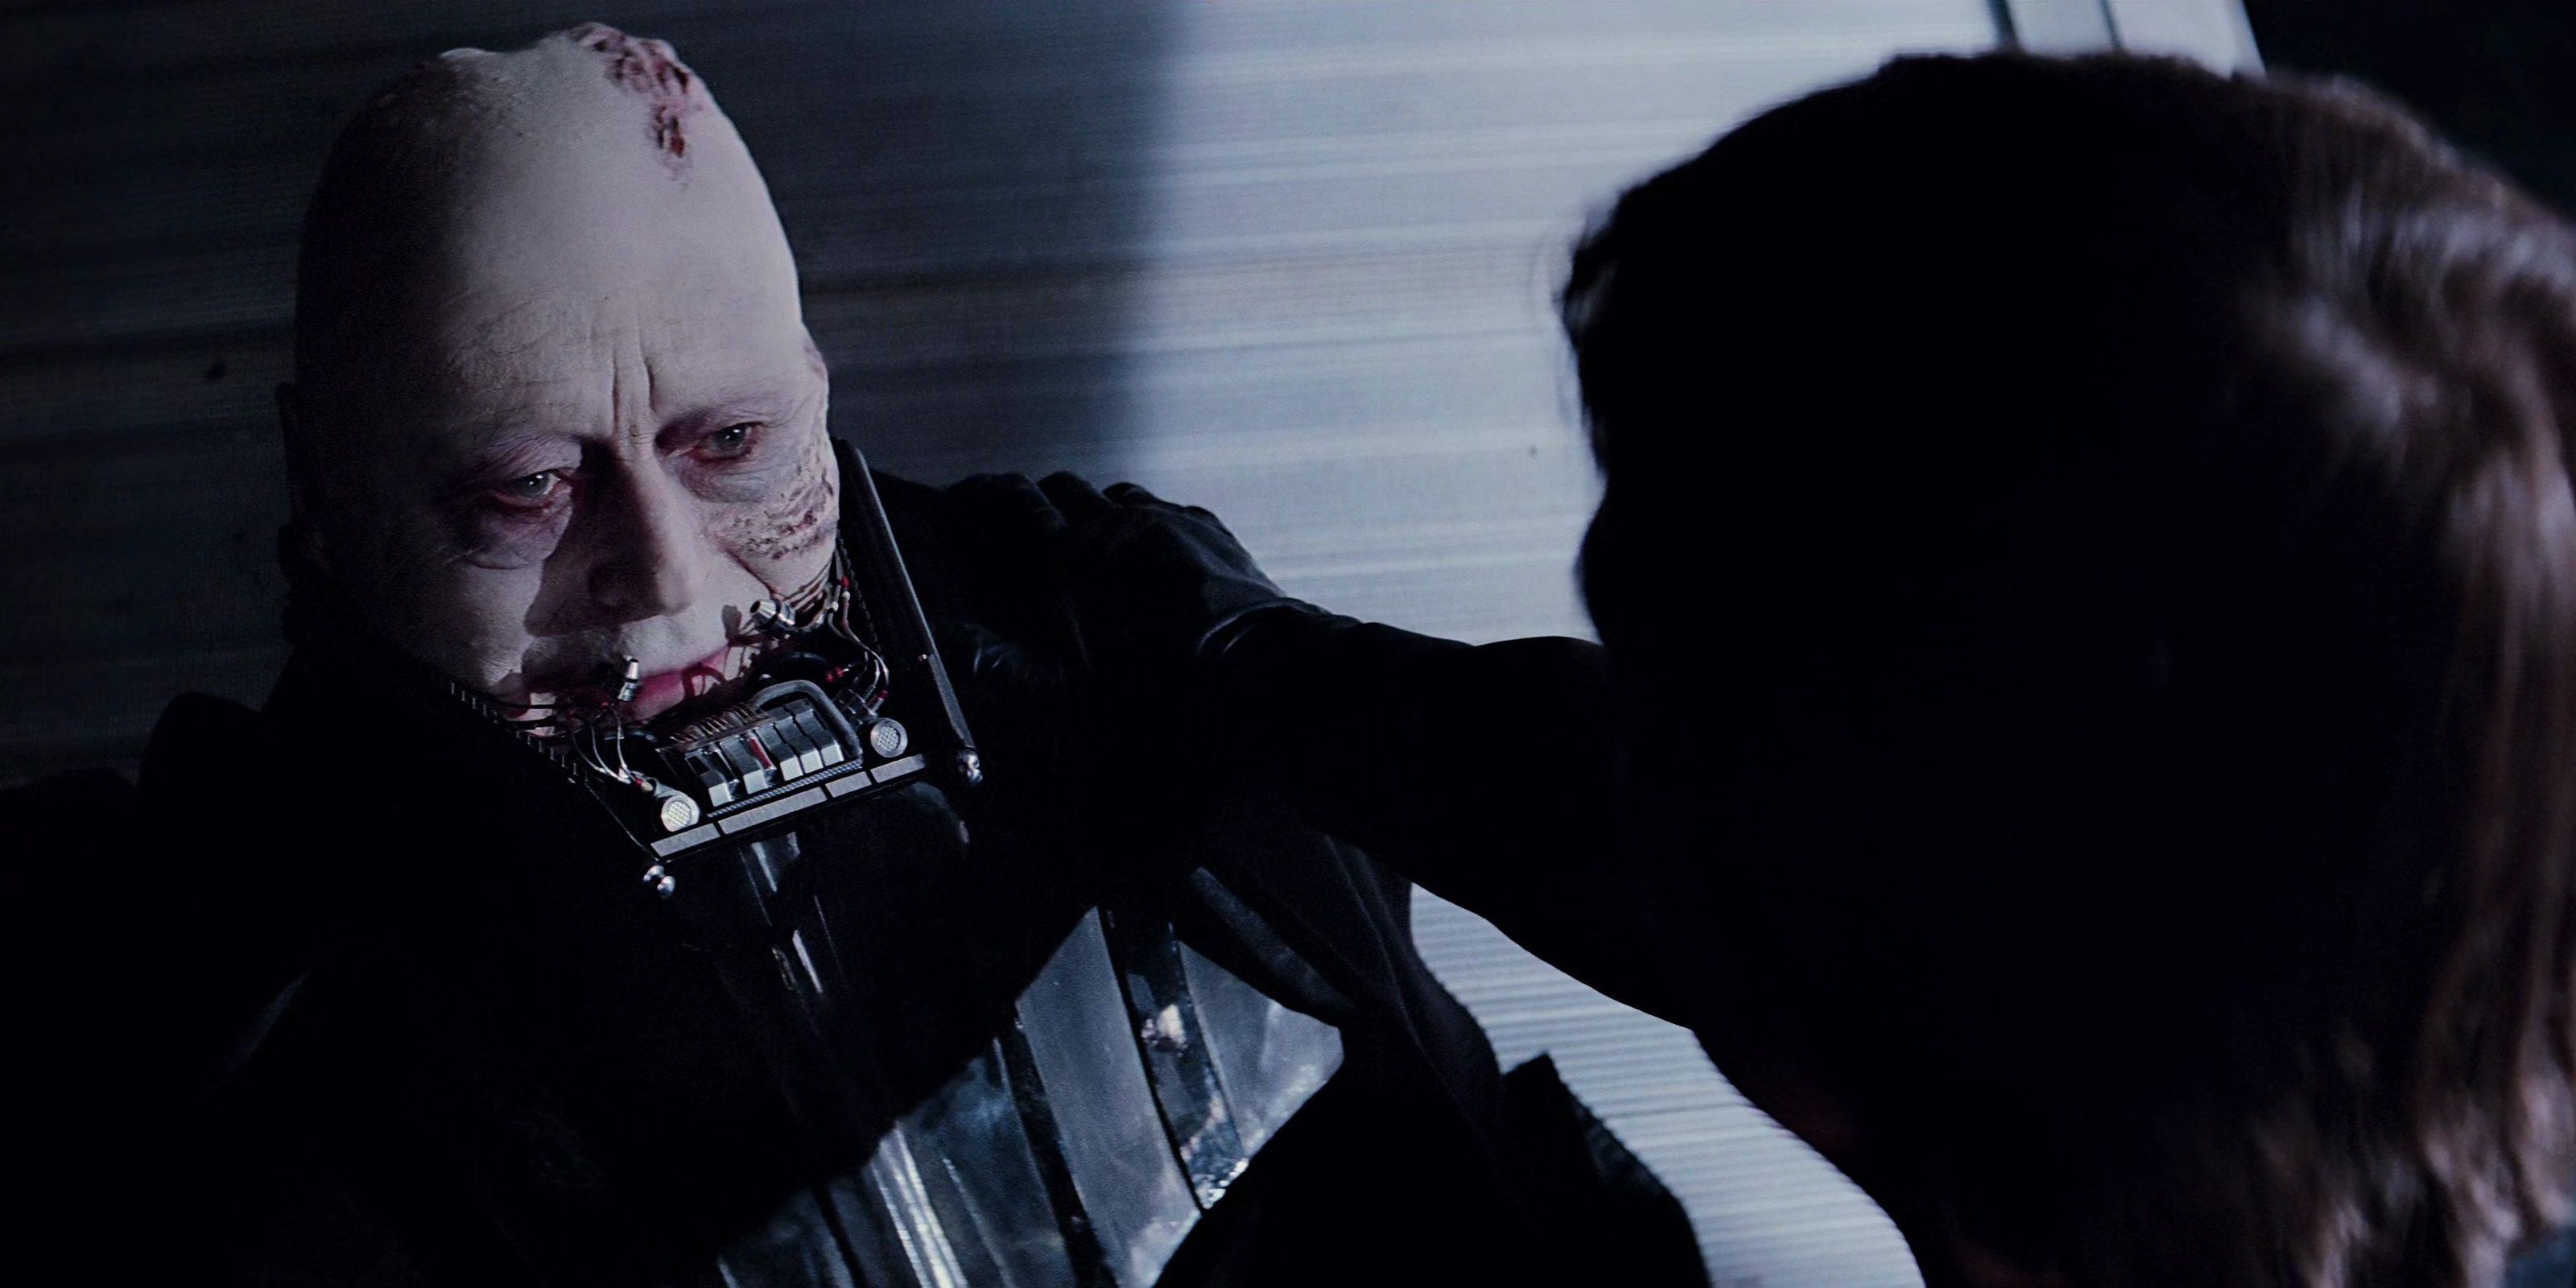 The unmasking of Darth Vader in Return of the Jedi